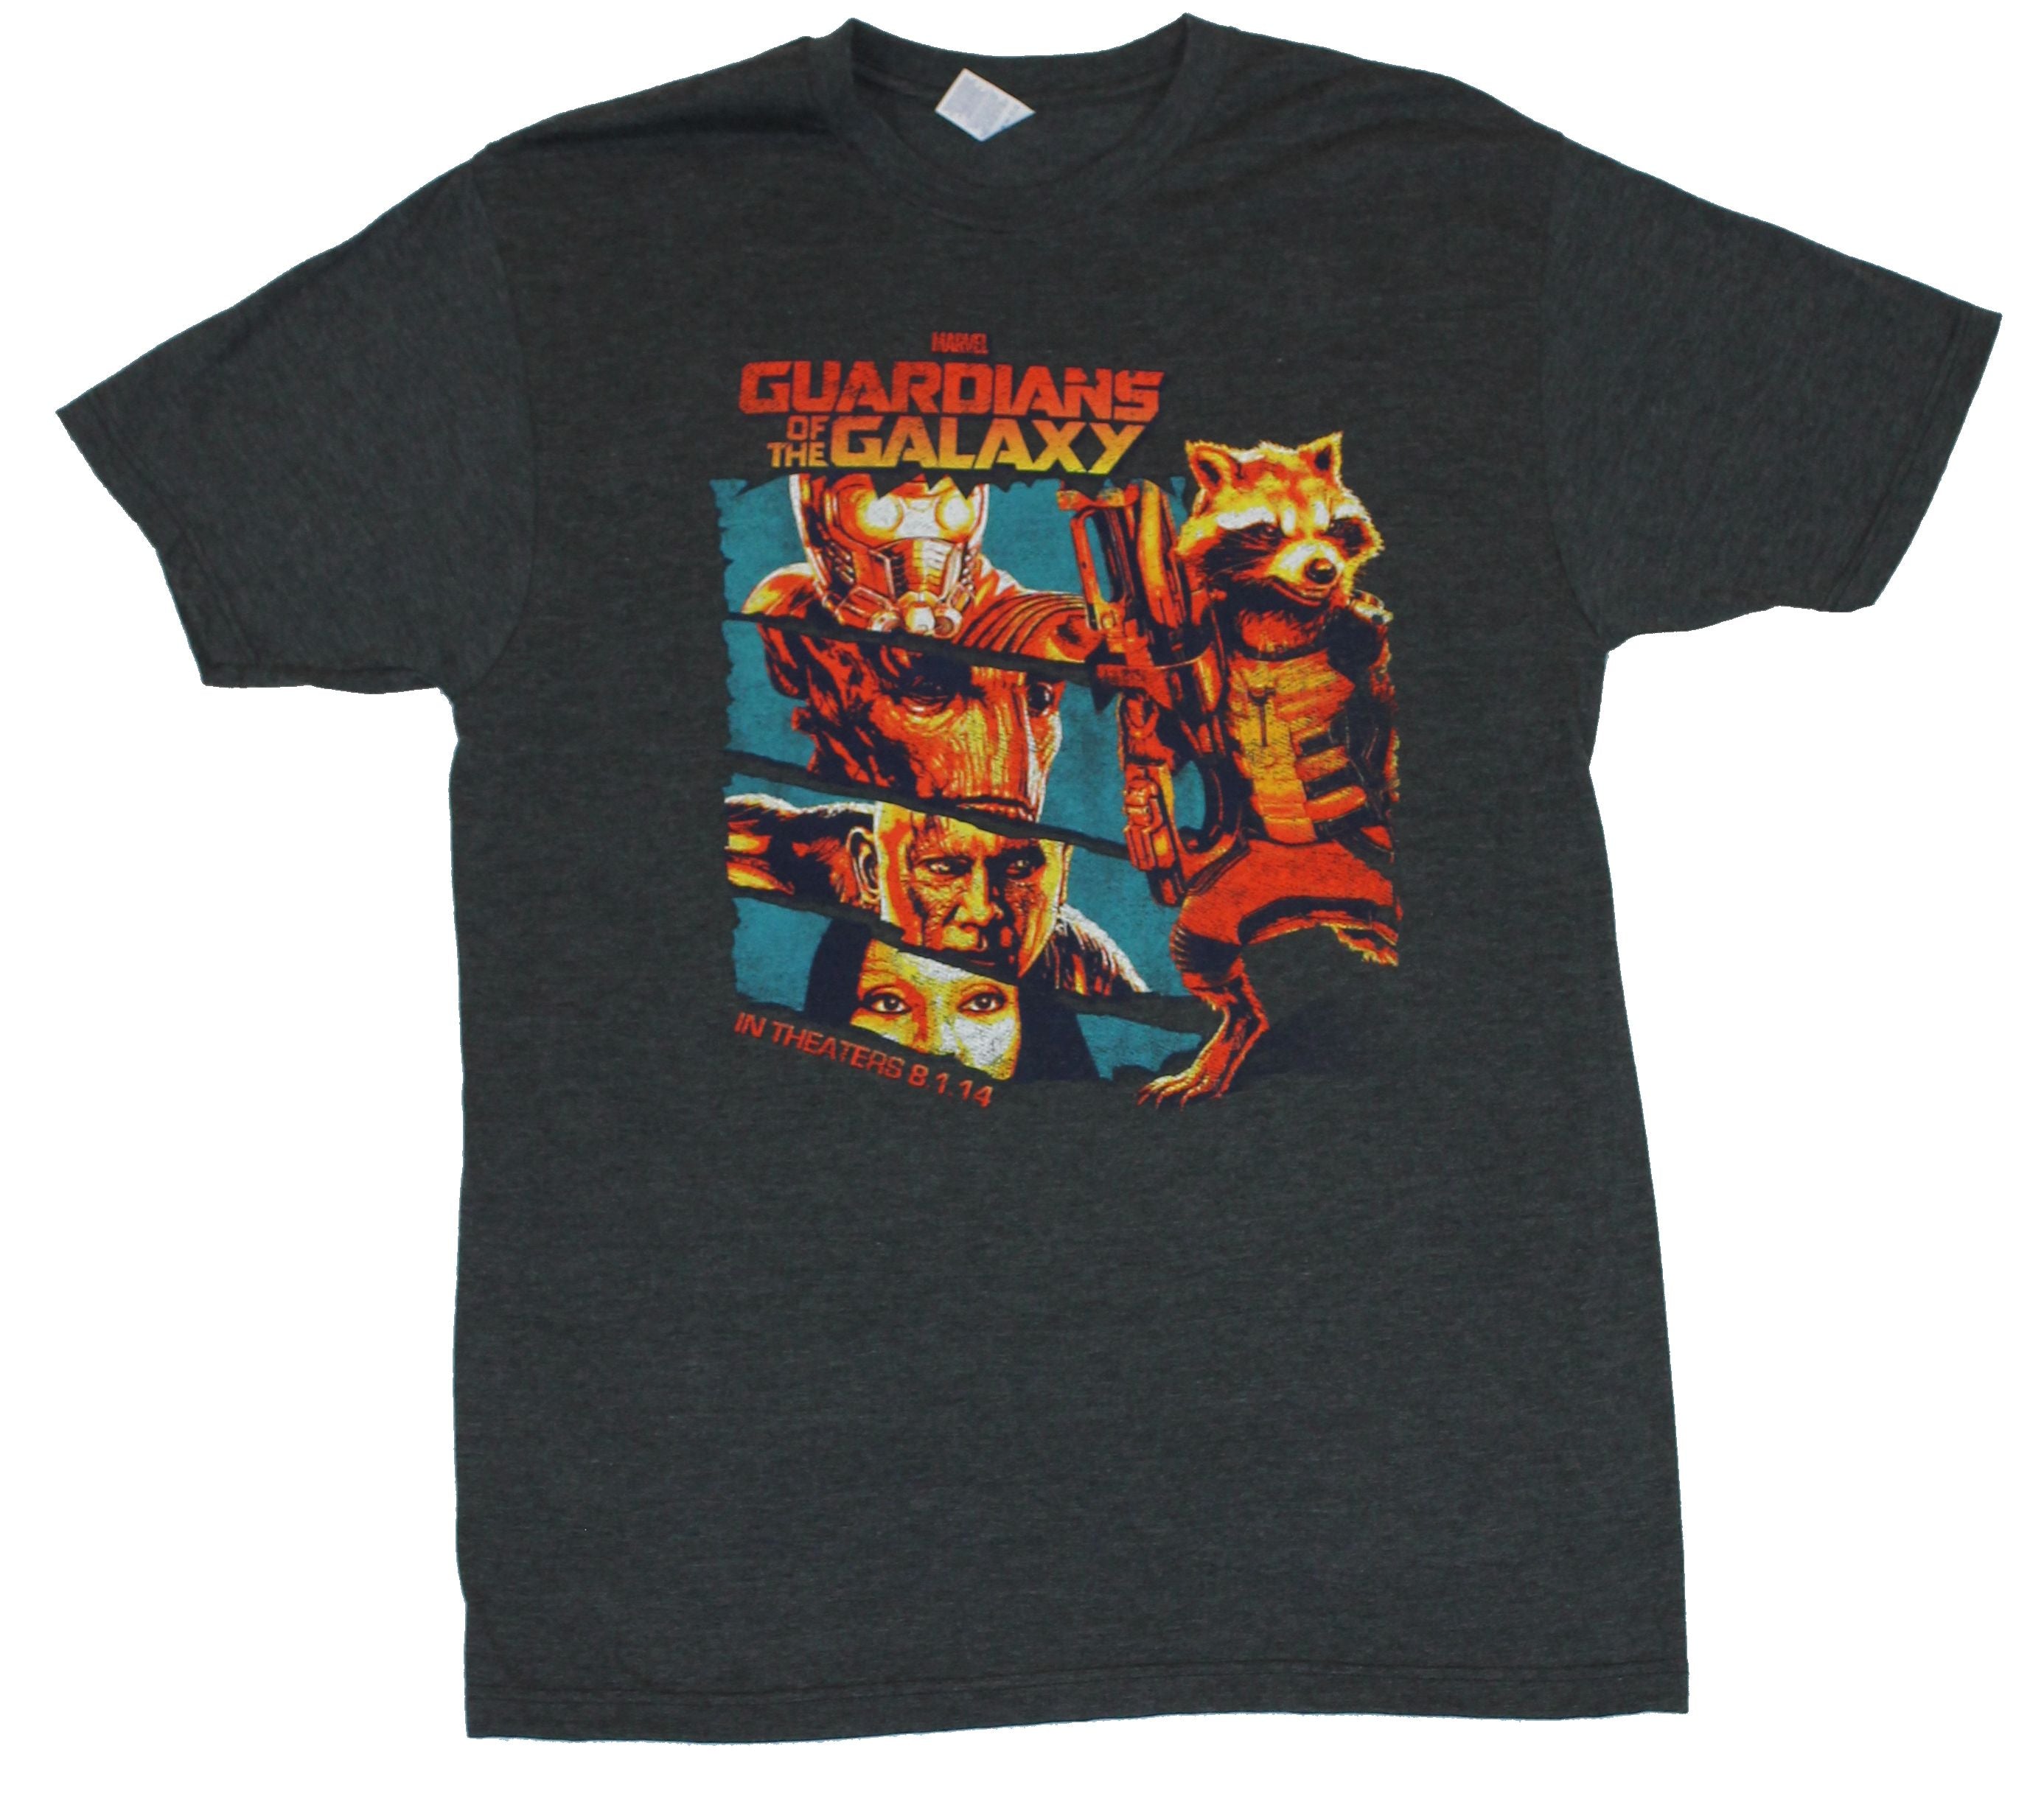 Guardians of the Galaxy Mens T-Shirt - Slashed Movie Hero Images w/ Release Date